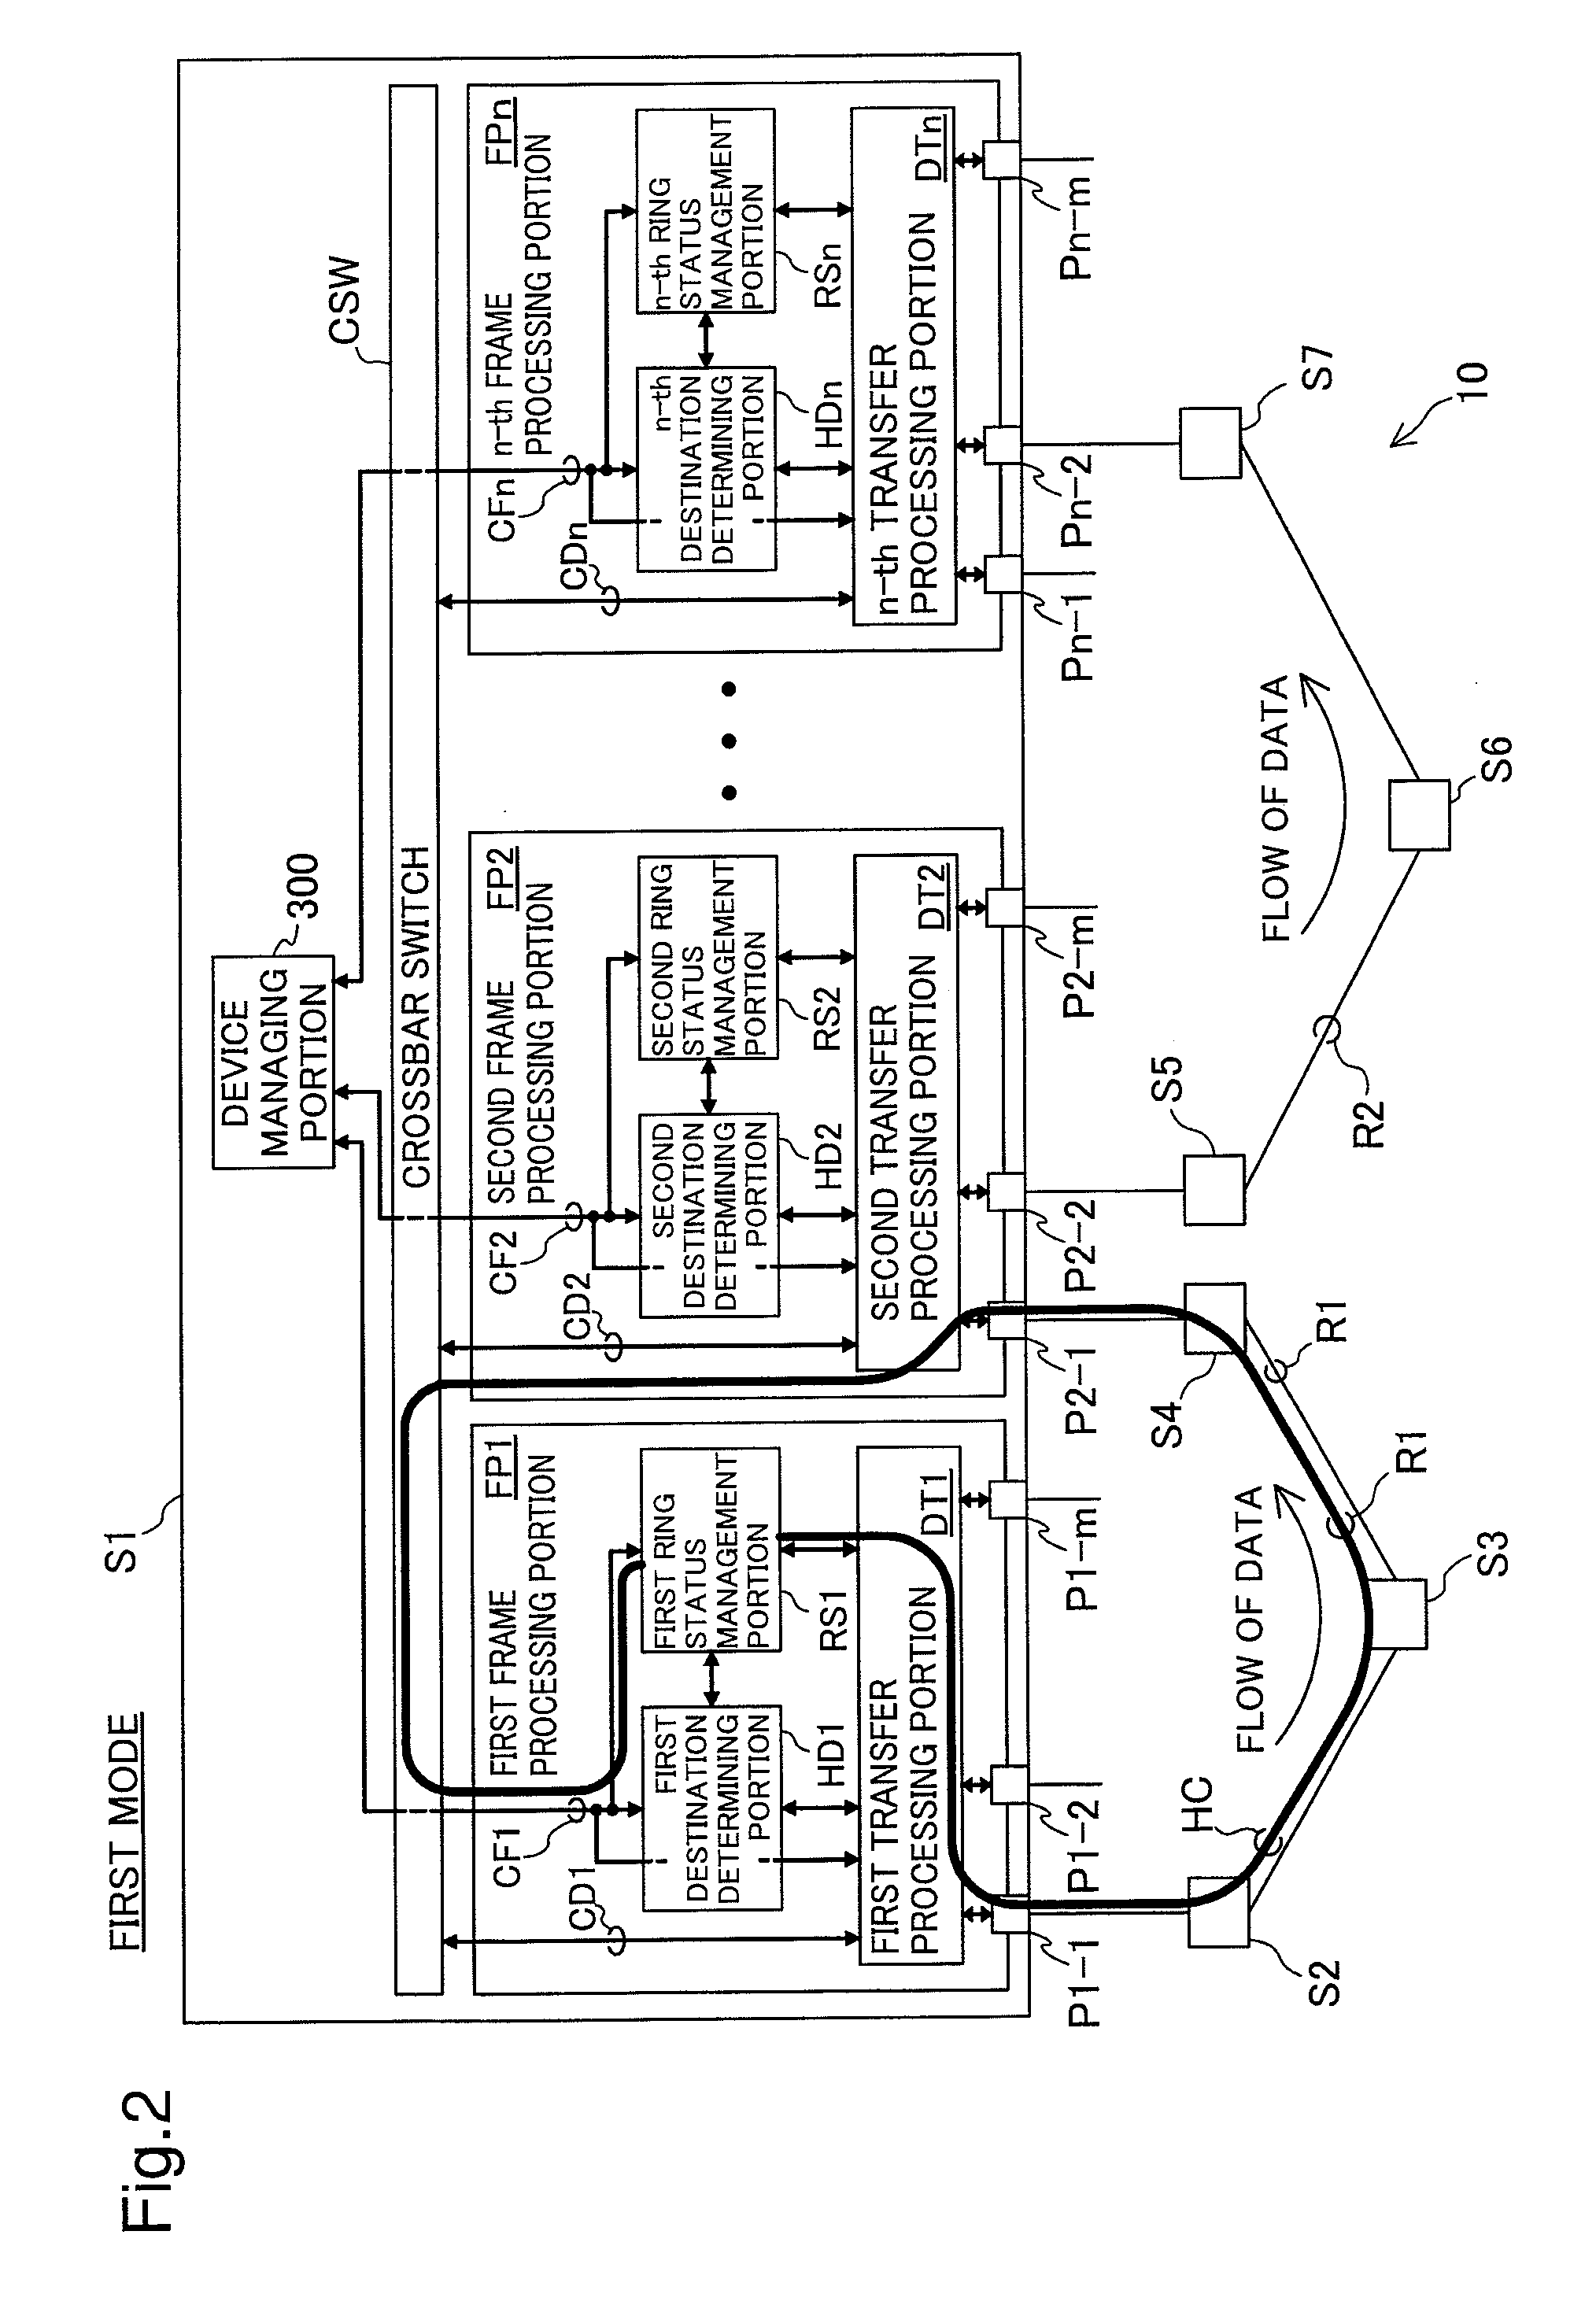 Data transfer device for ring protocol high speed switching and method for the same